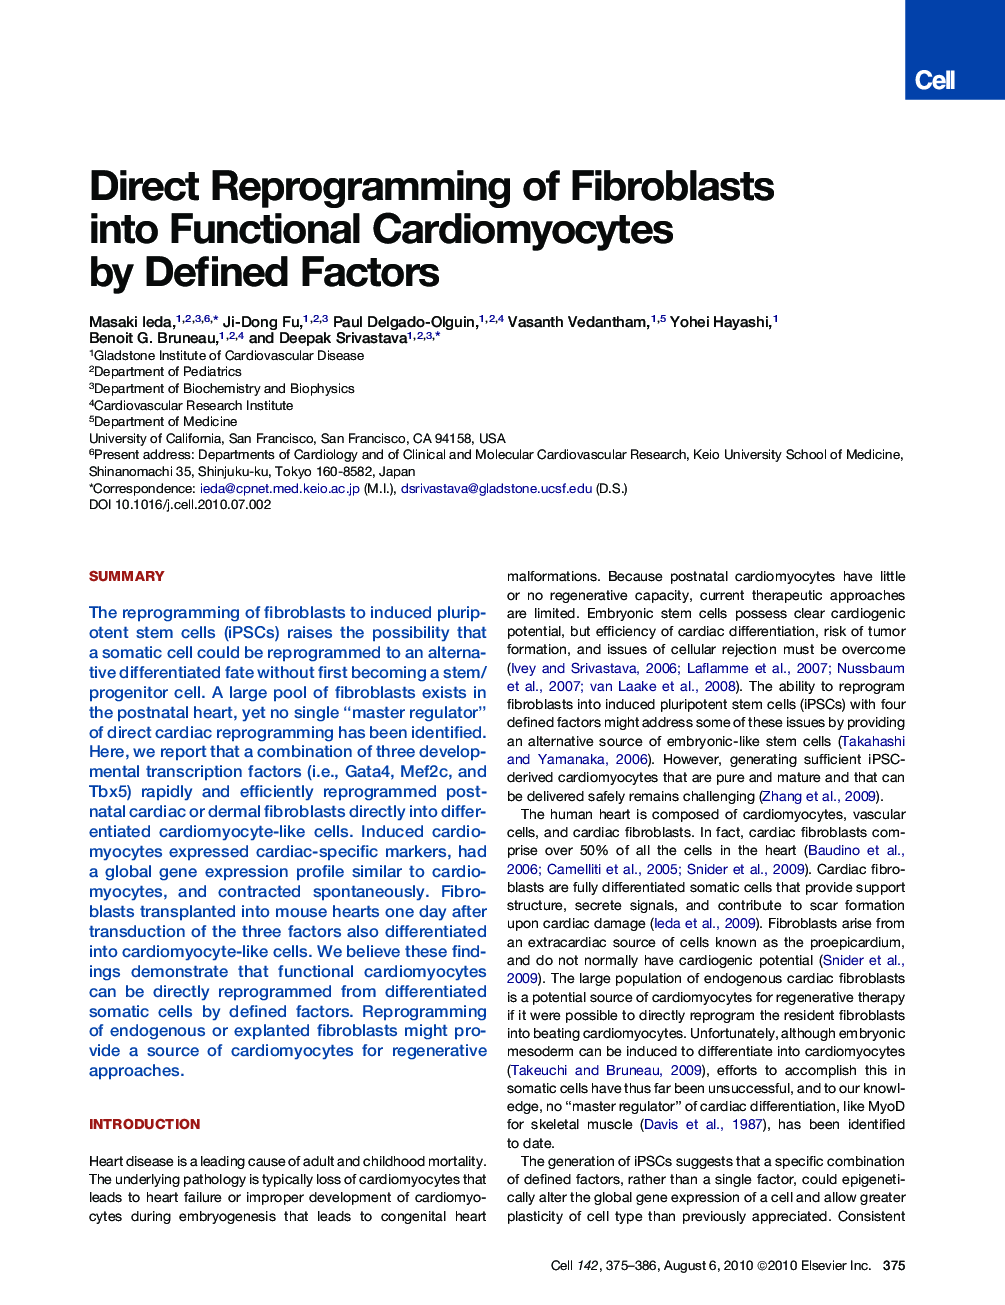 Direct Reprogramming of Fibroblasts into Functional Cardiomyocytes by Defined Factors